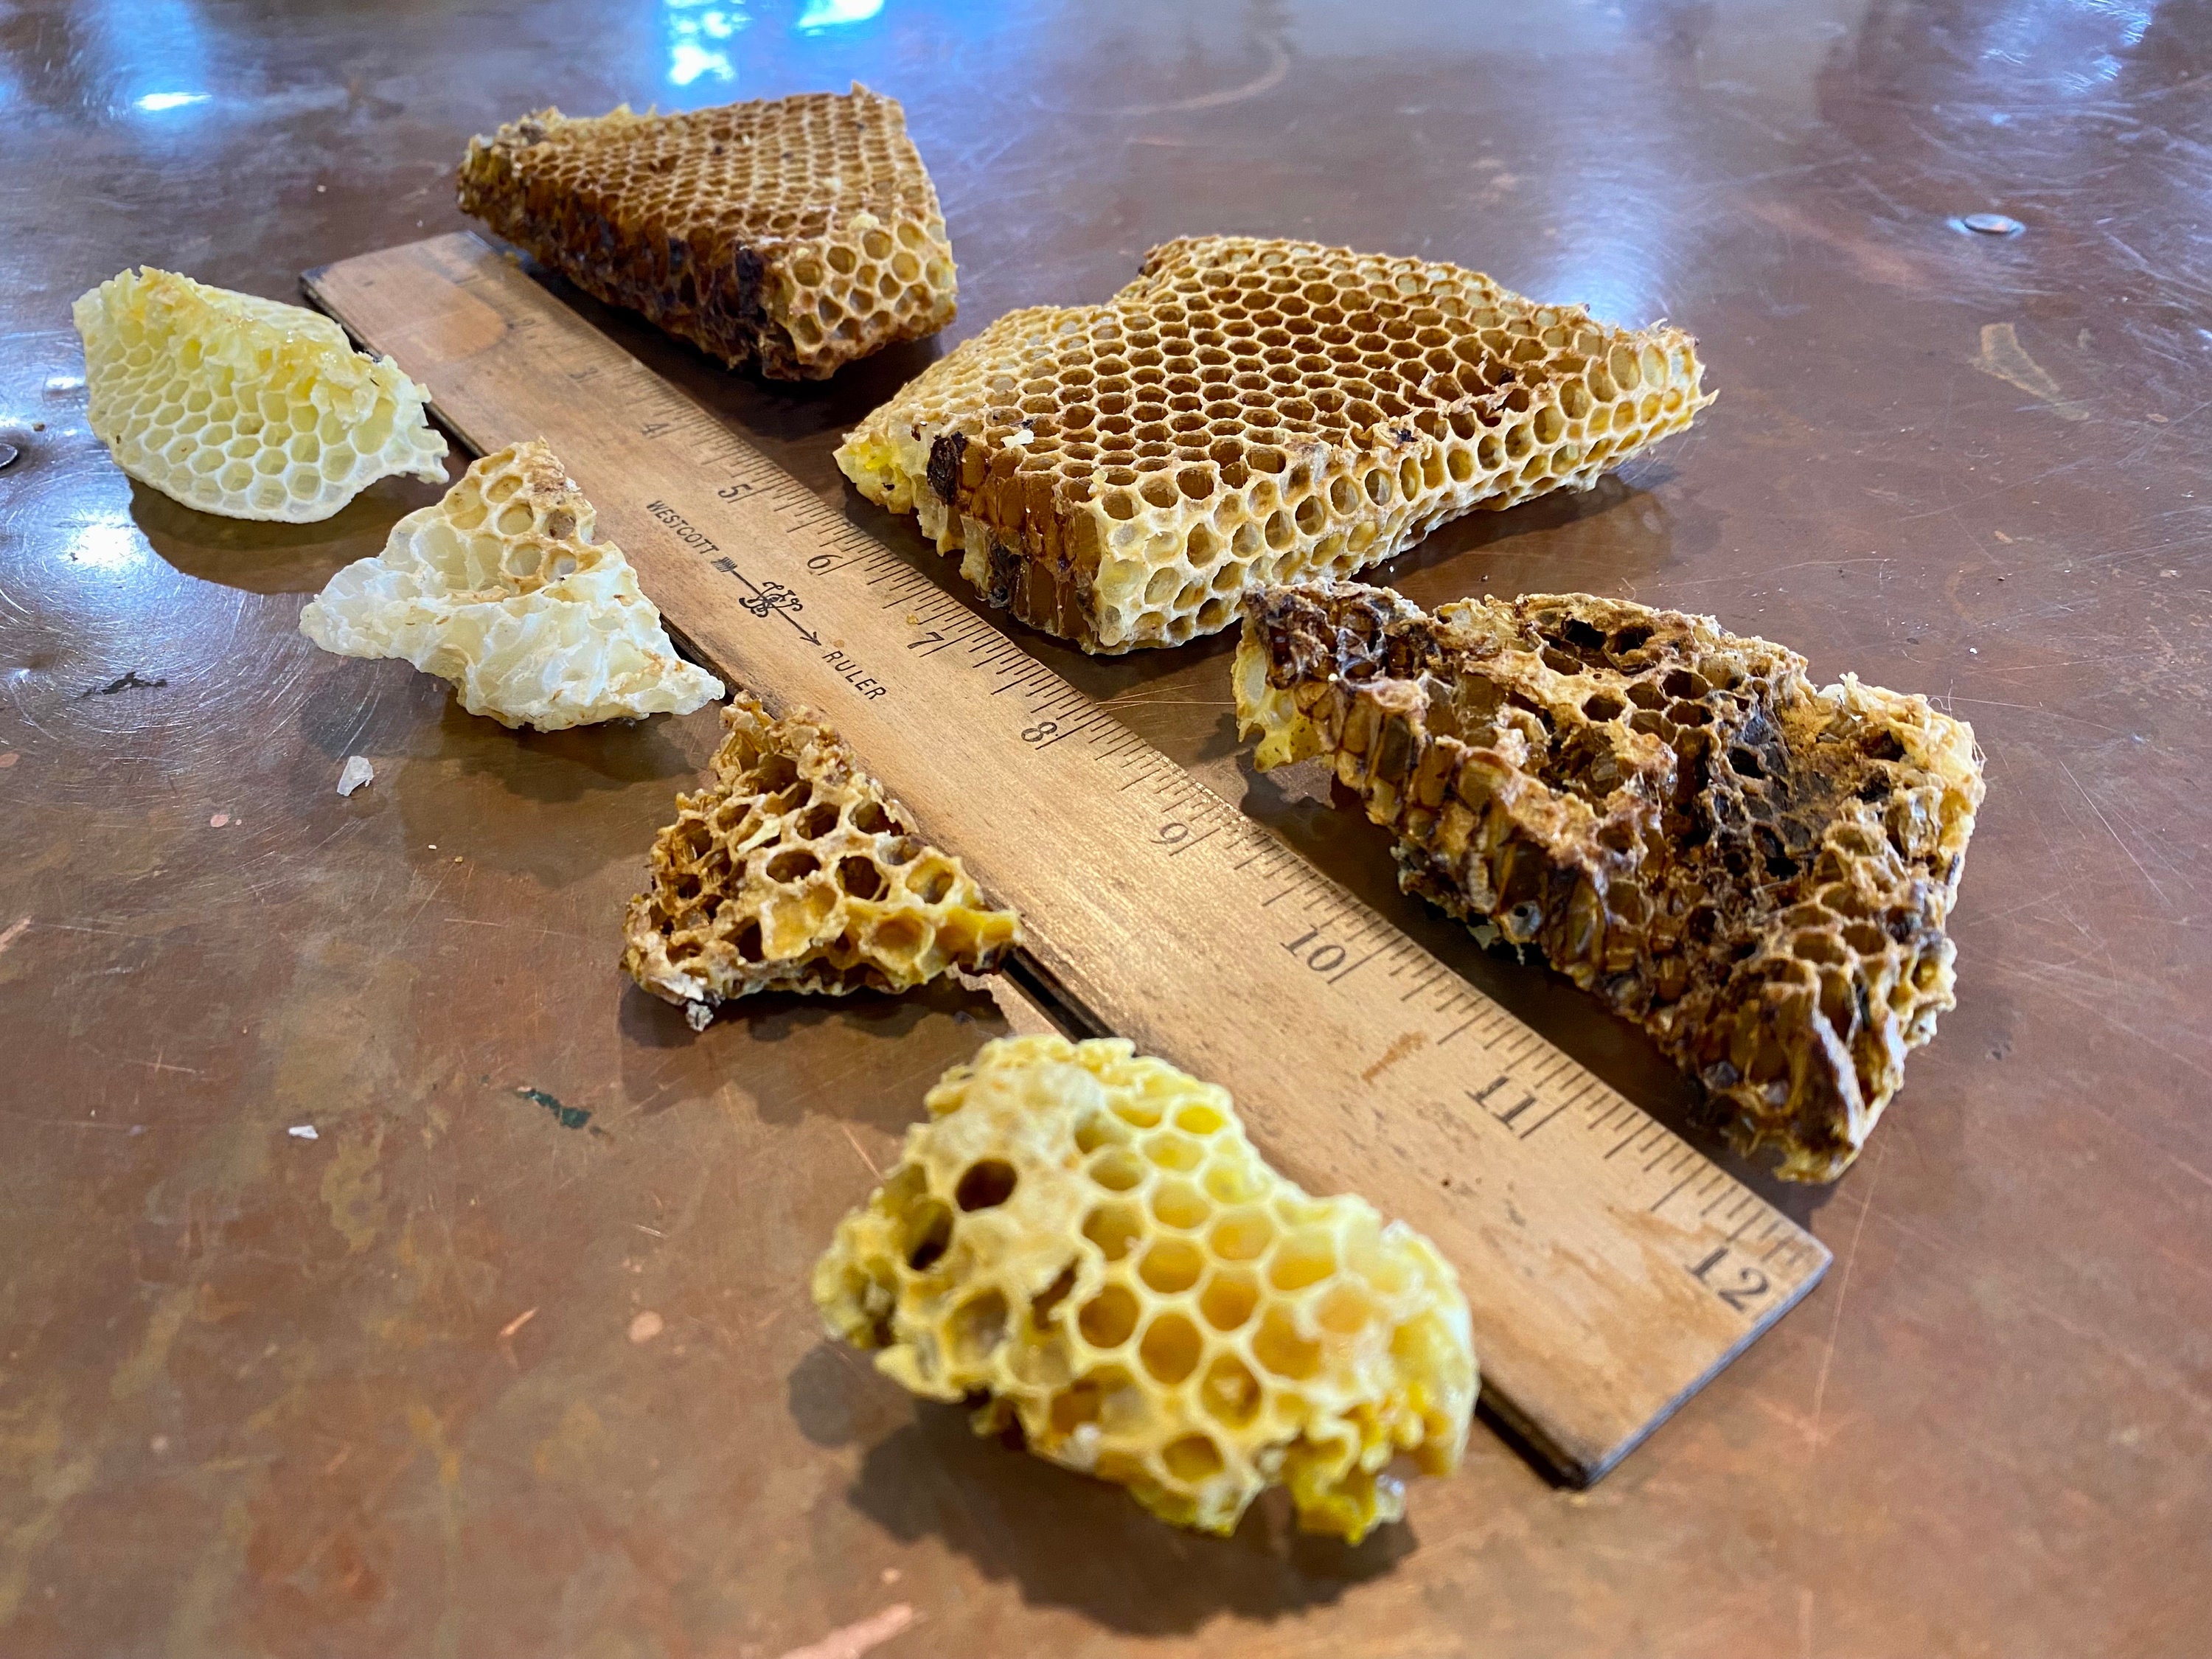 Buy Raw Honeycomb For Sale Online in The United States – Smiley Honey